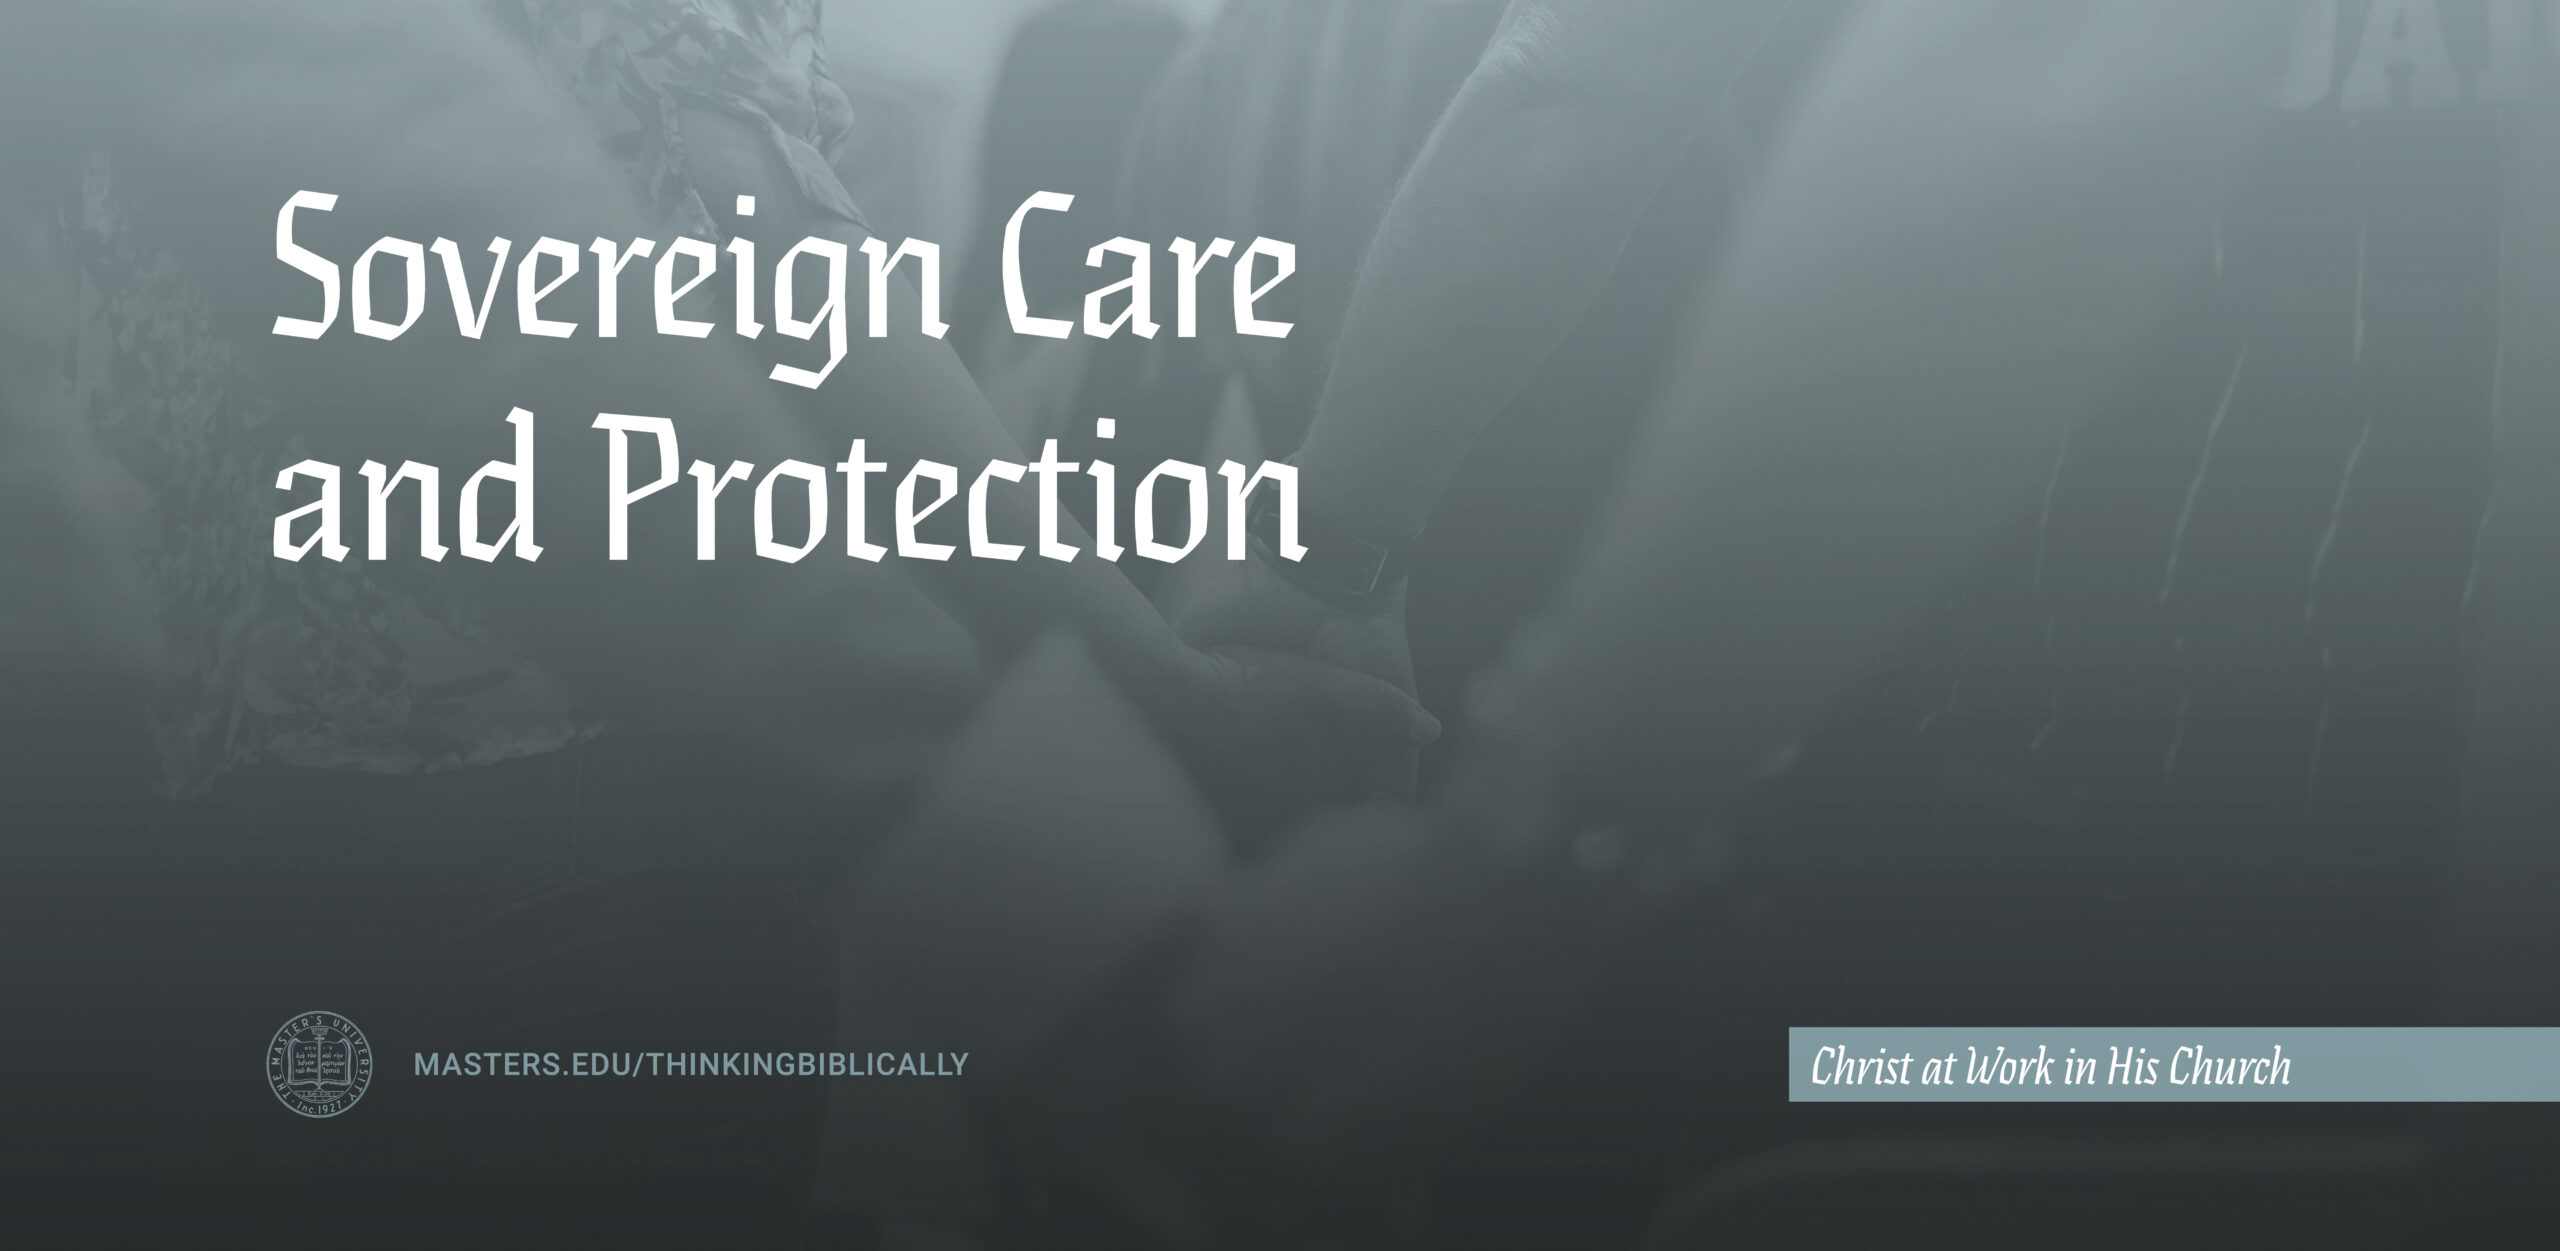 Sovereign Care and Protection Featured Image